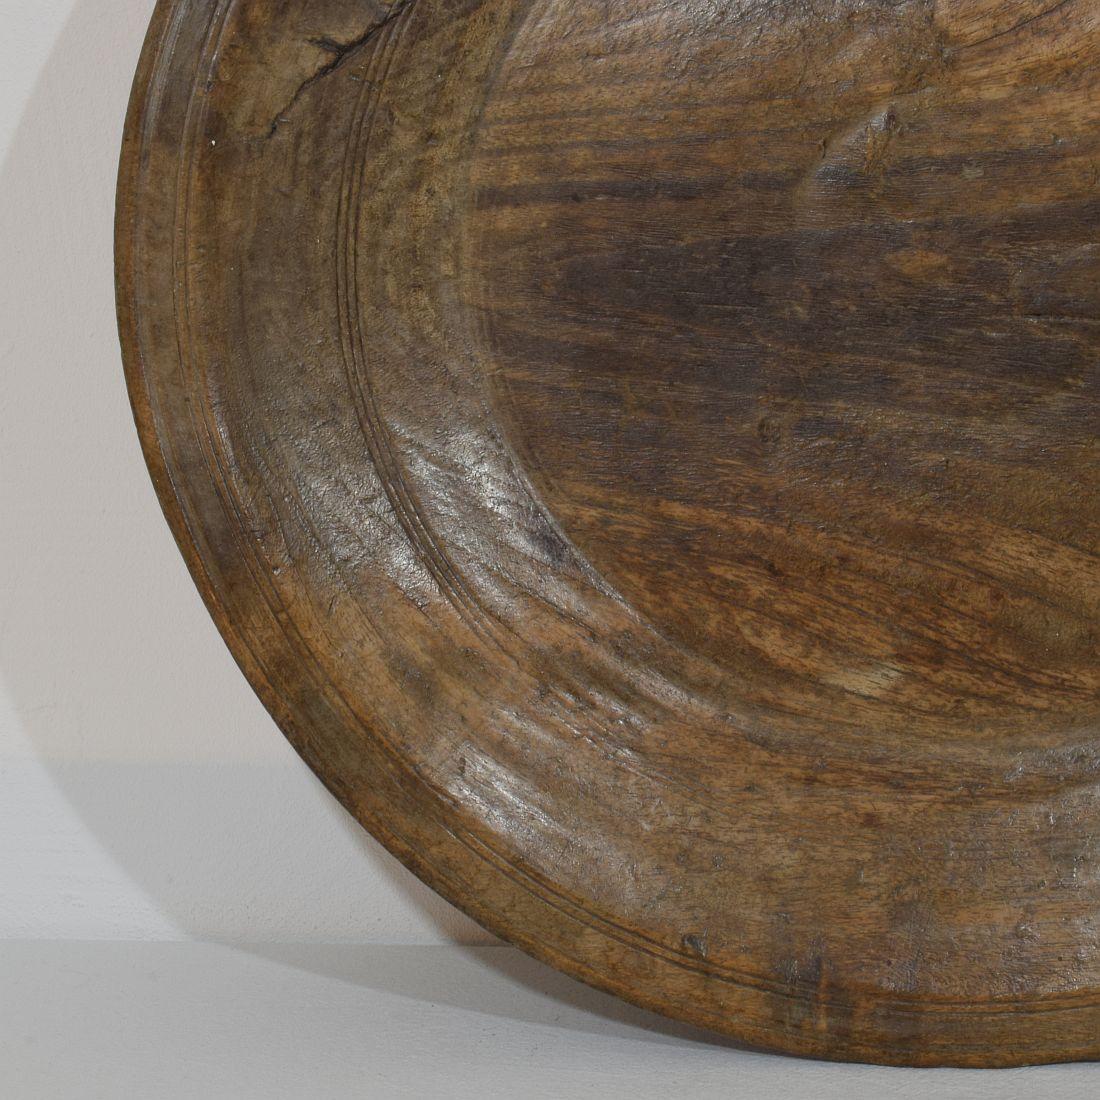 Large 18th Century French Wooden Bowl / Platter For Sale 4